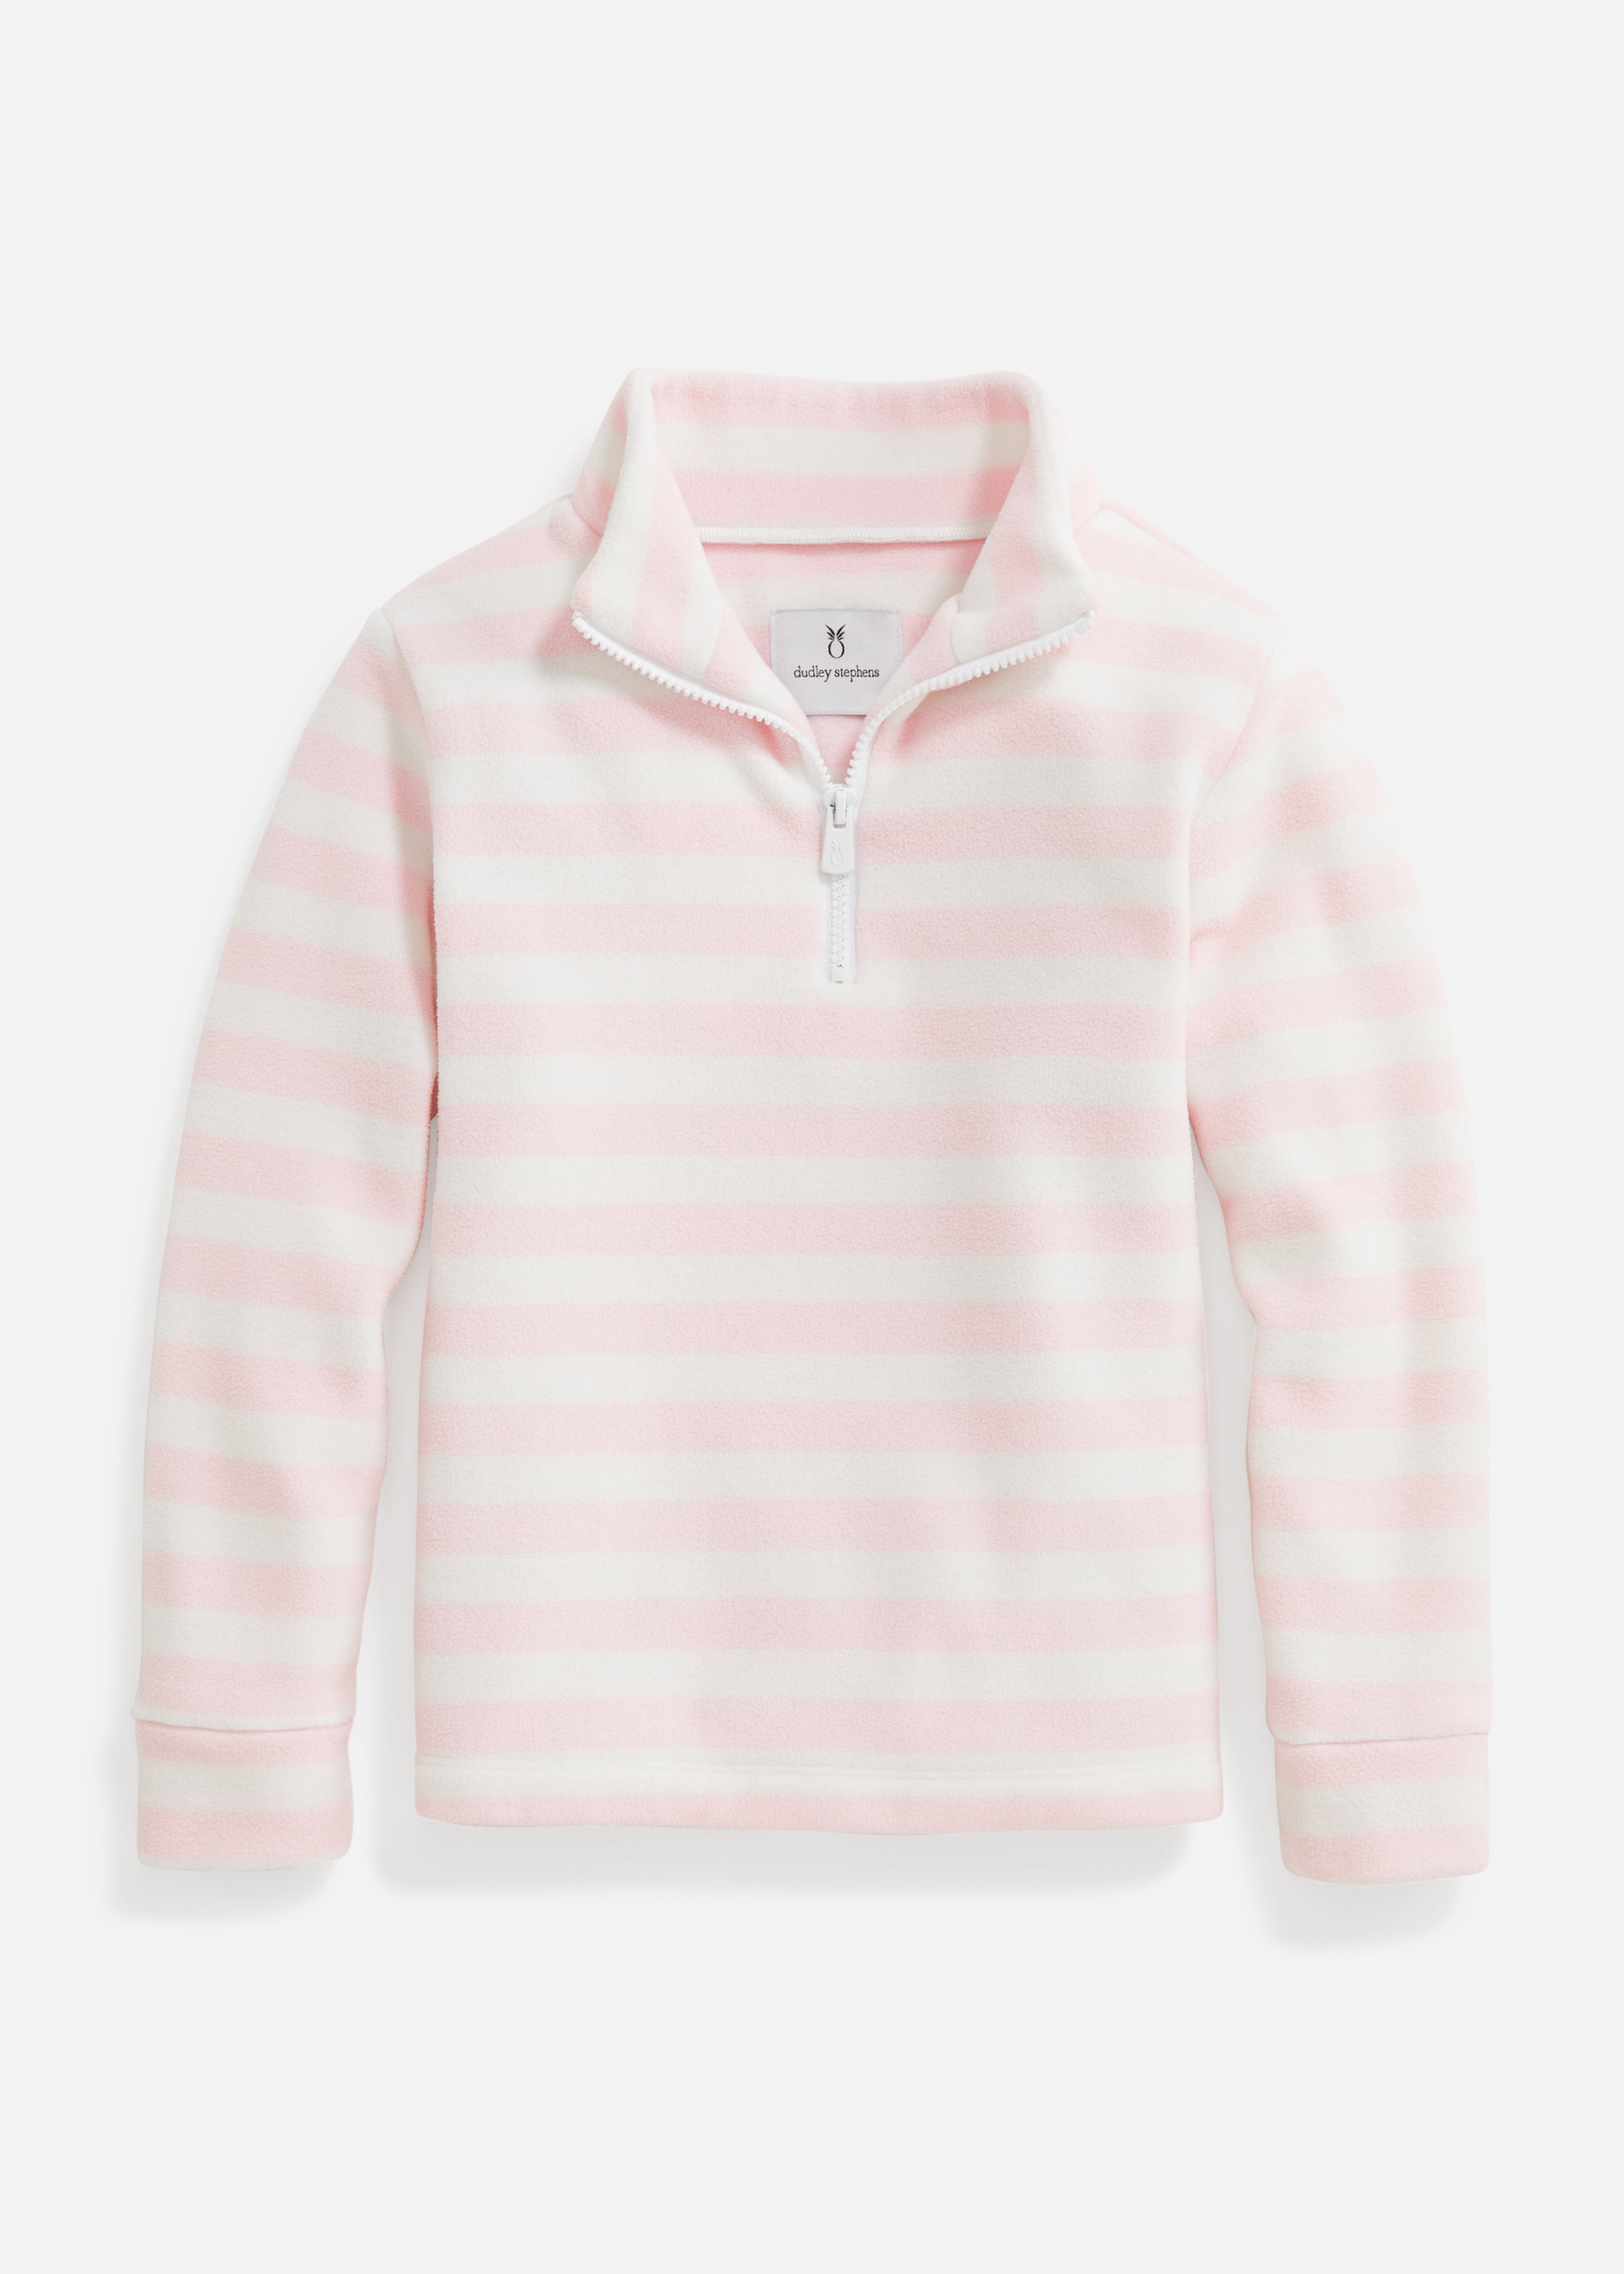 Kids Windabout / Dudley Fleece – Striped Pullover (Pink Stephens White) in